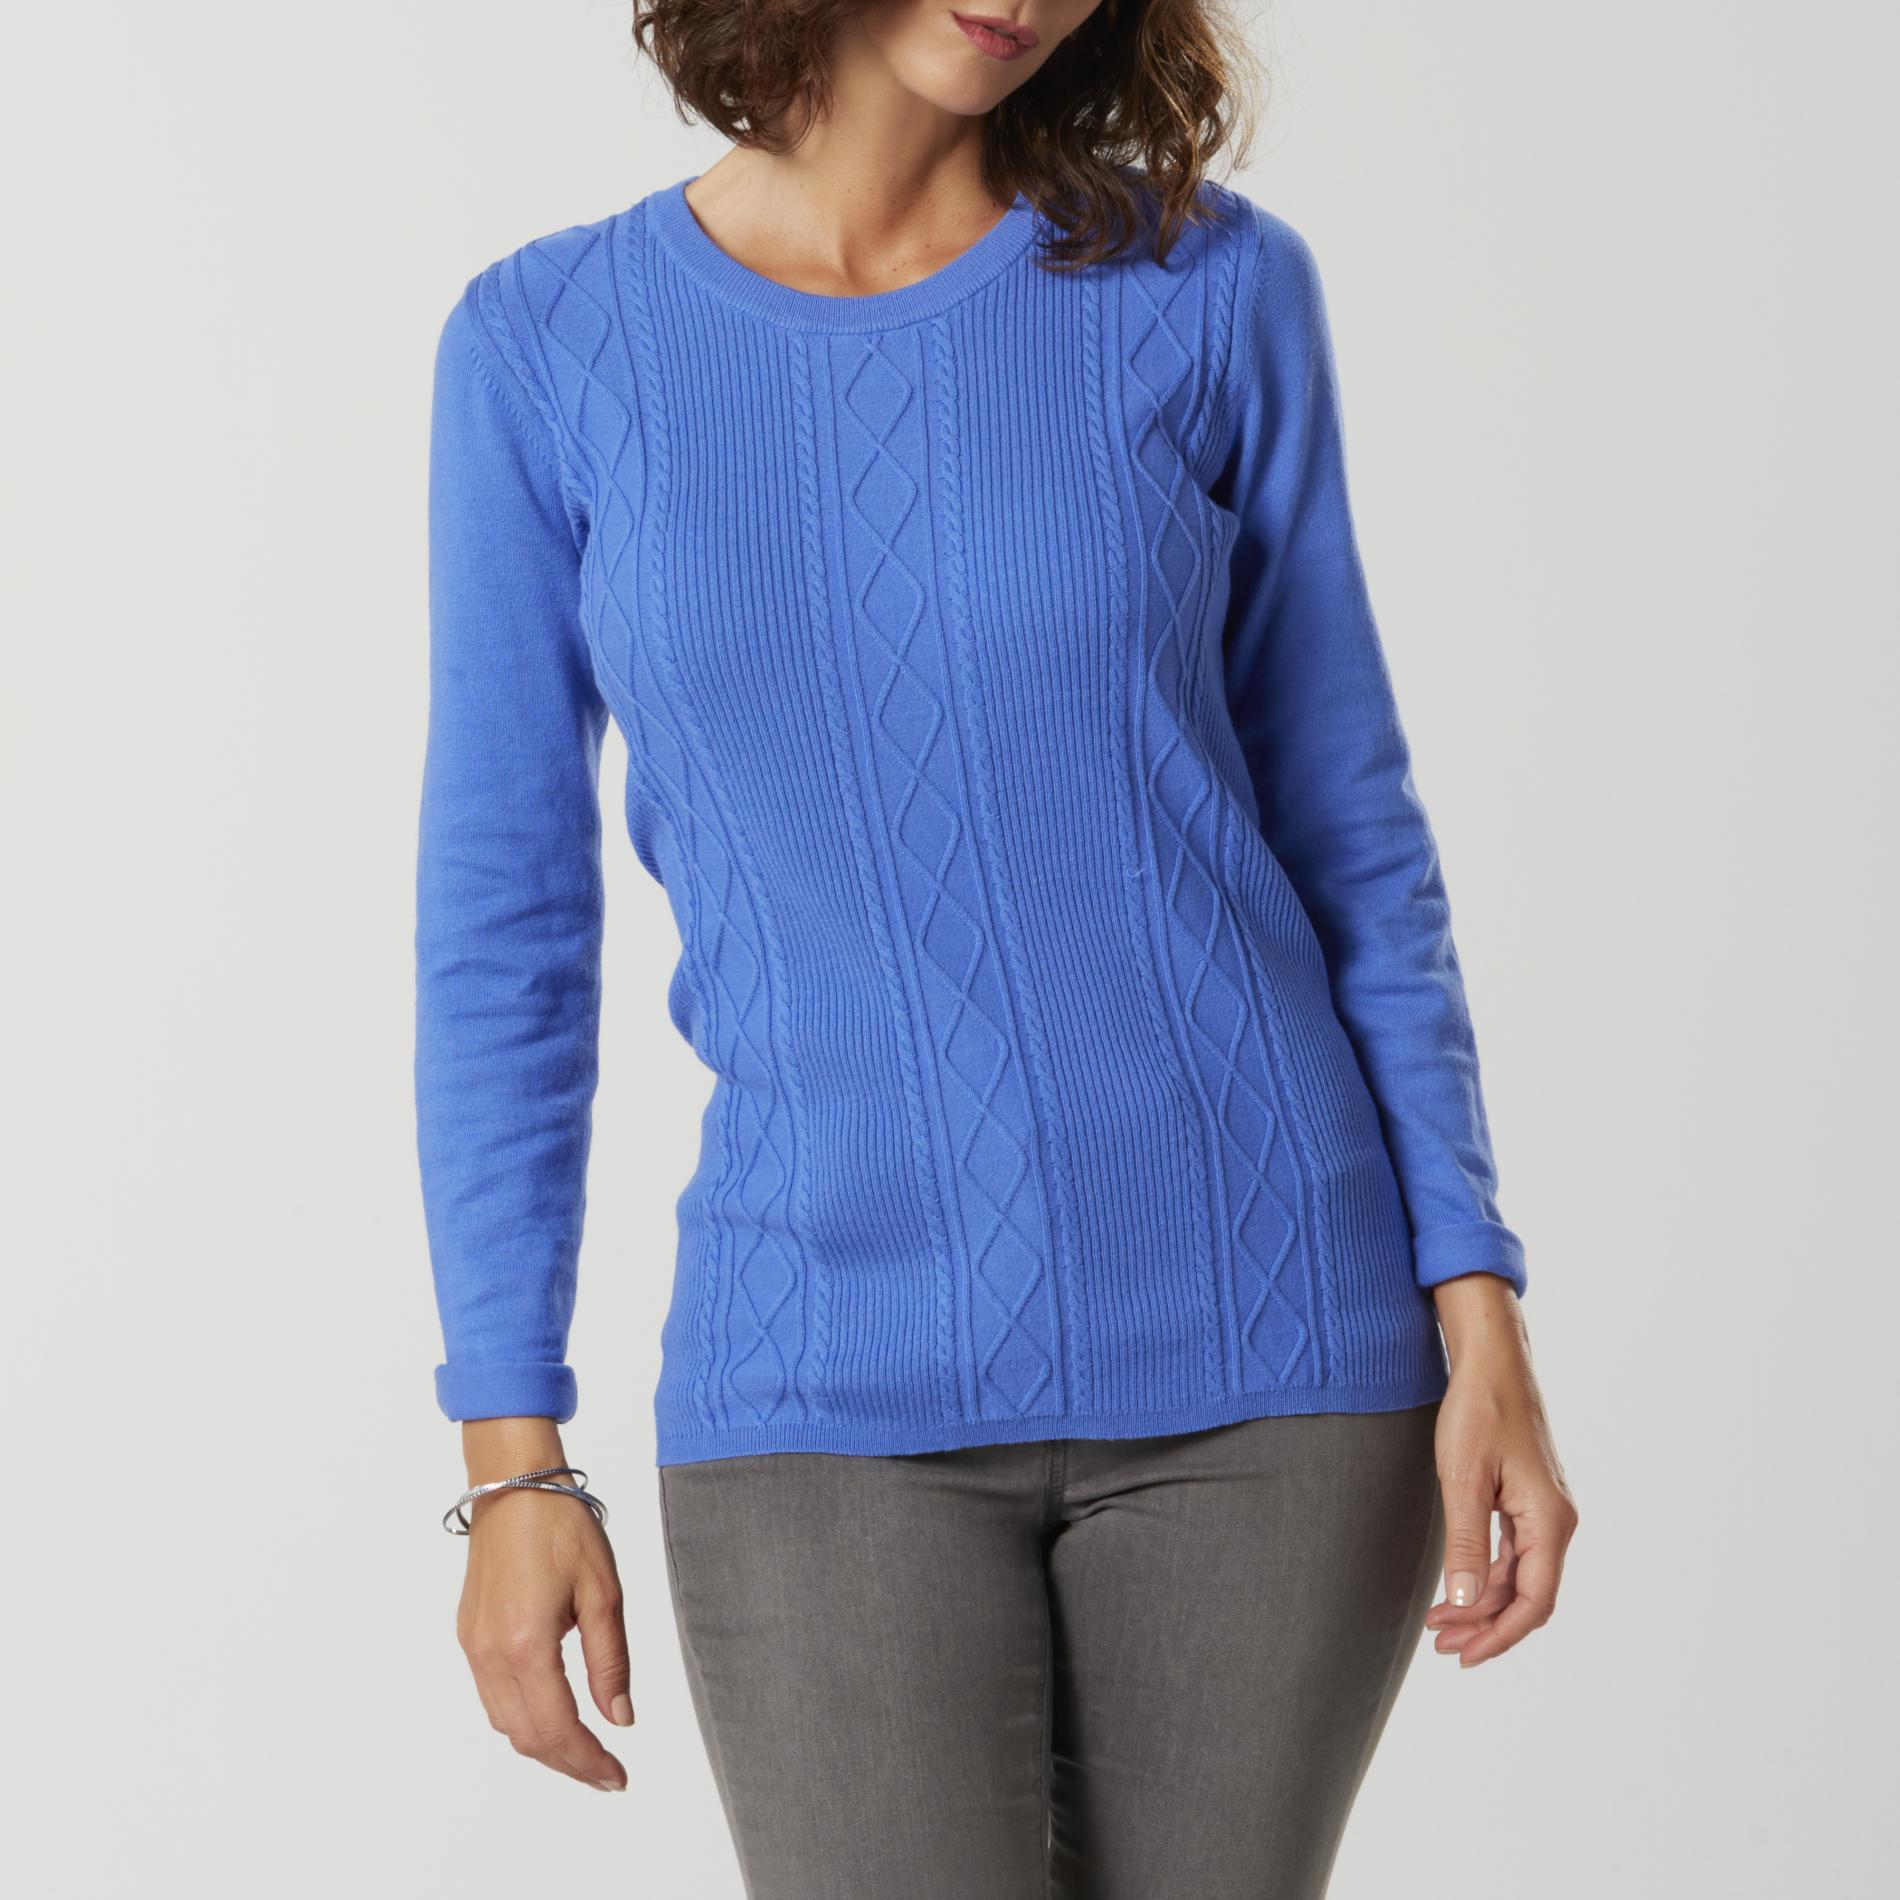 Basic Editions Women's Cable Knit Sweater